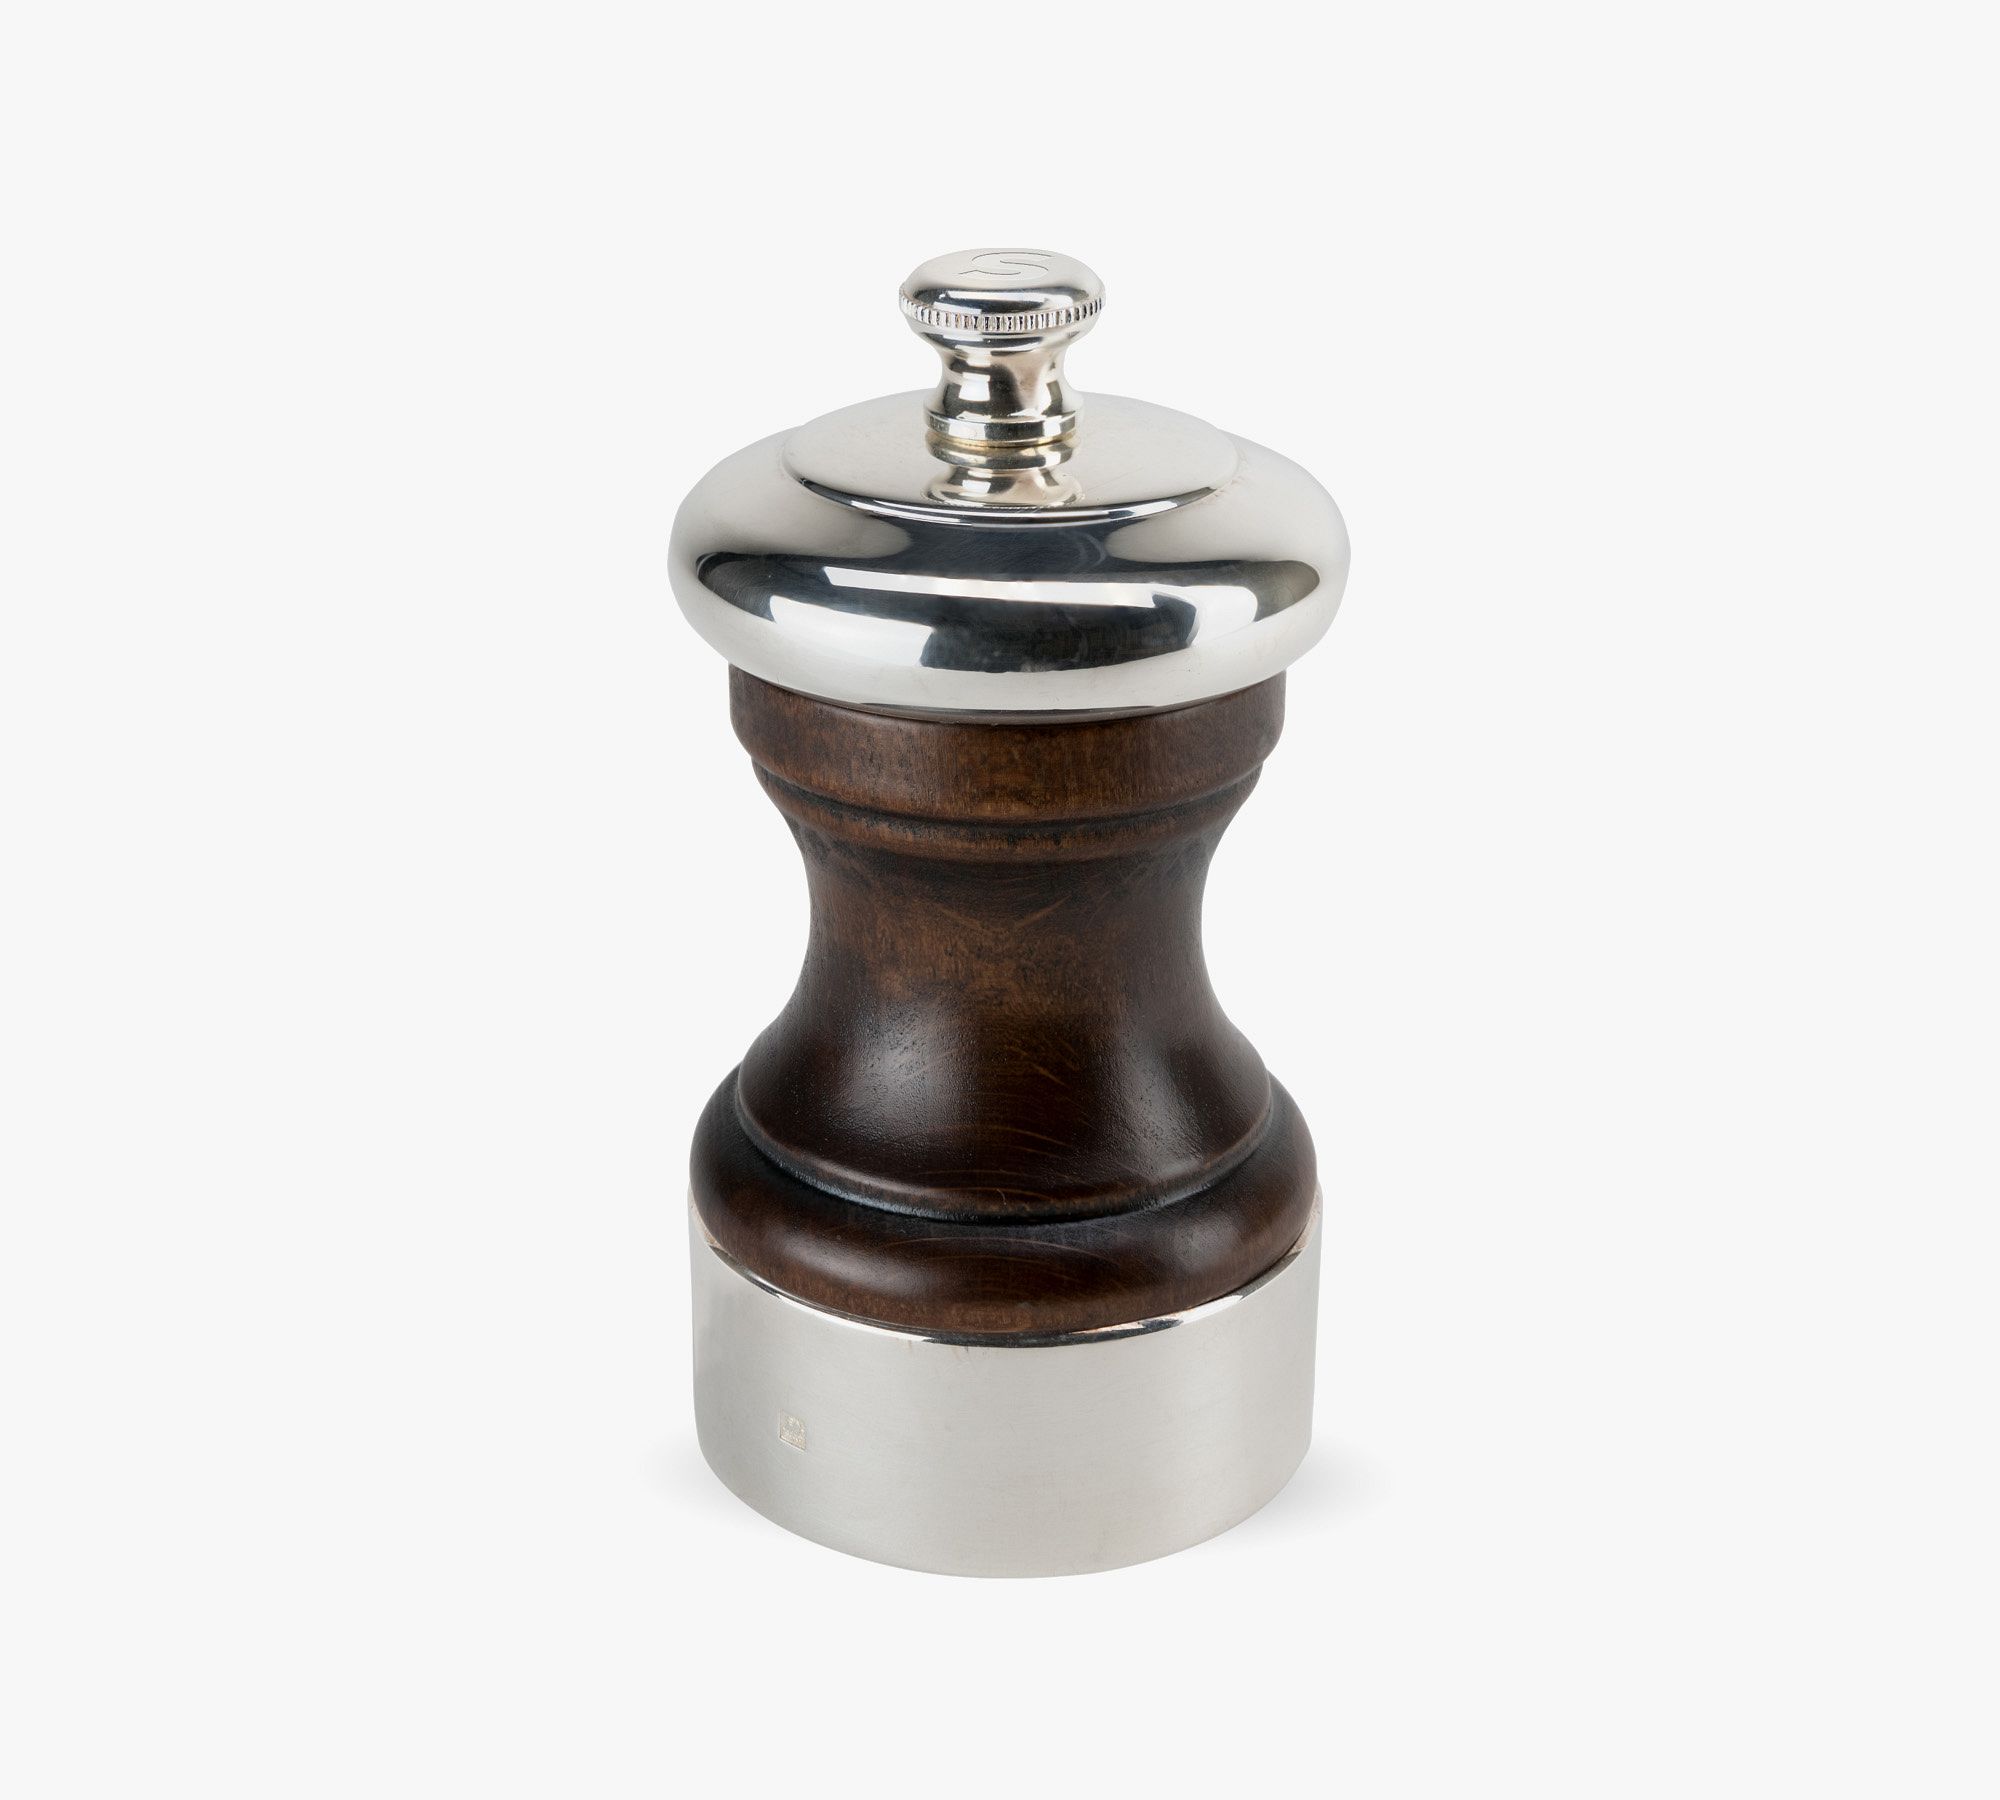 Peugeot Palace Silver-Plated Salt and Pepper Mills